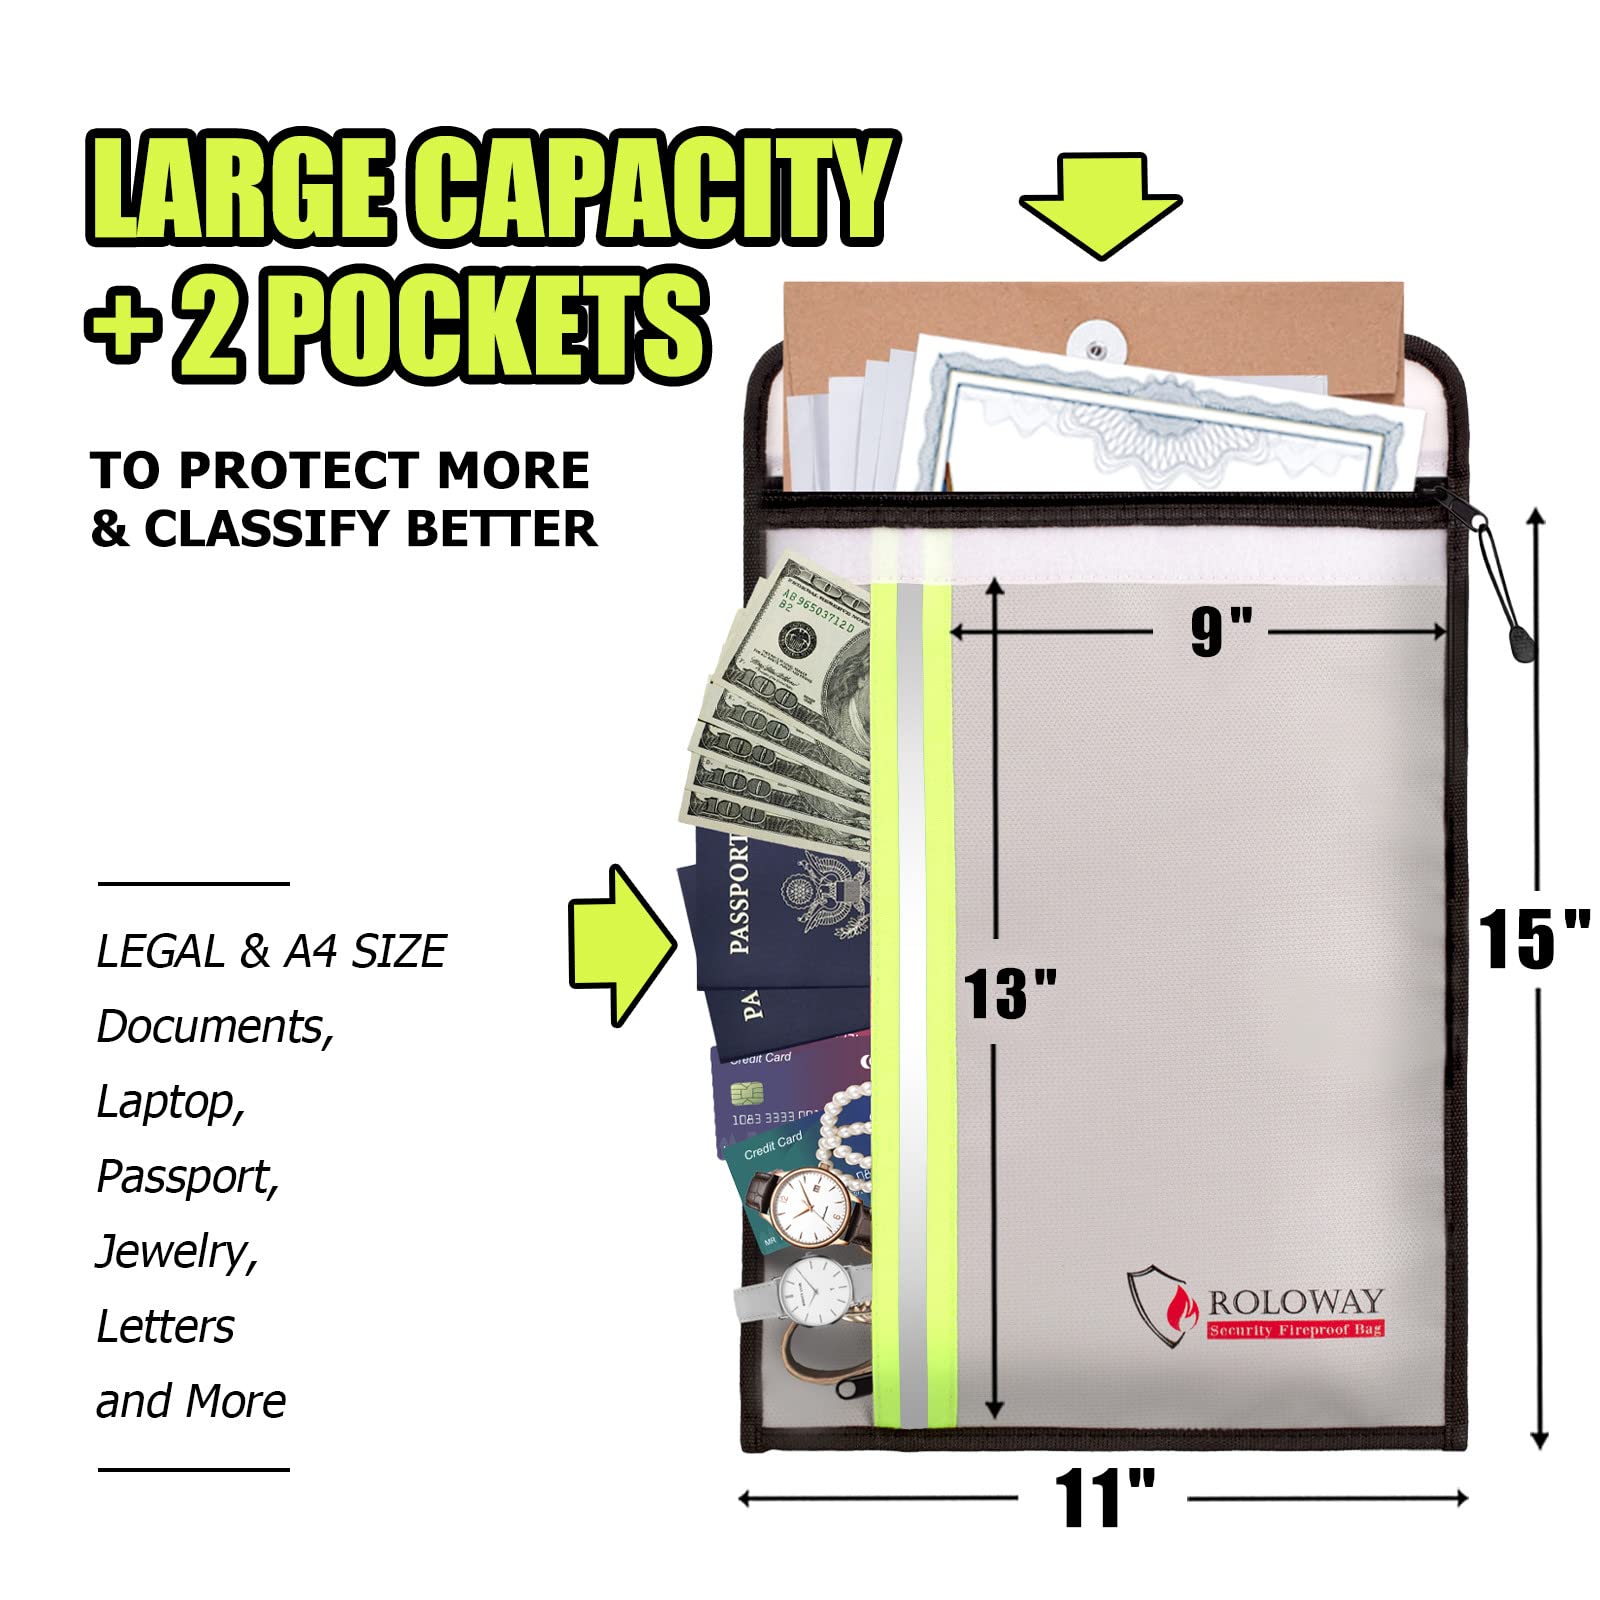 ROLOWAY Fireproof Document Bag (15 x 11 inch) with 2 Pockets & Waterproof Zipper, Fireproof Money Bag, Fire Safe Bag with Reflective Strip, Fireproof Envelope for Cash, Legal Documents Safe (Silver)